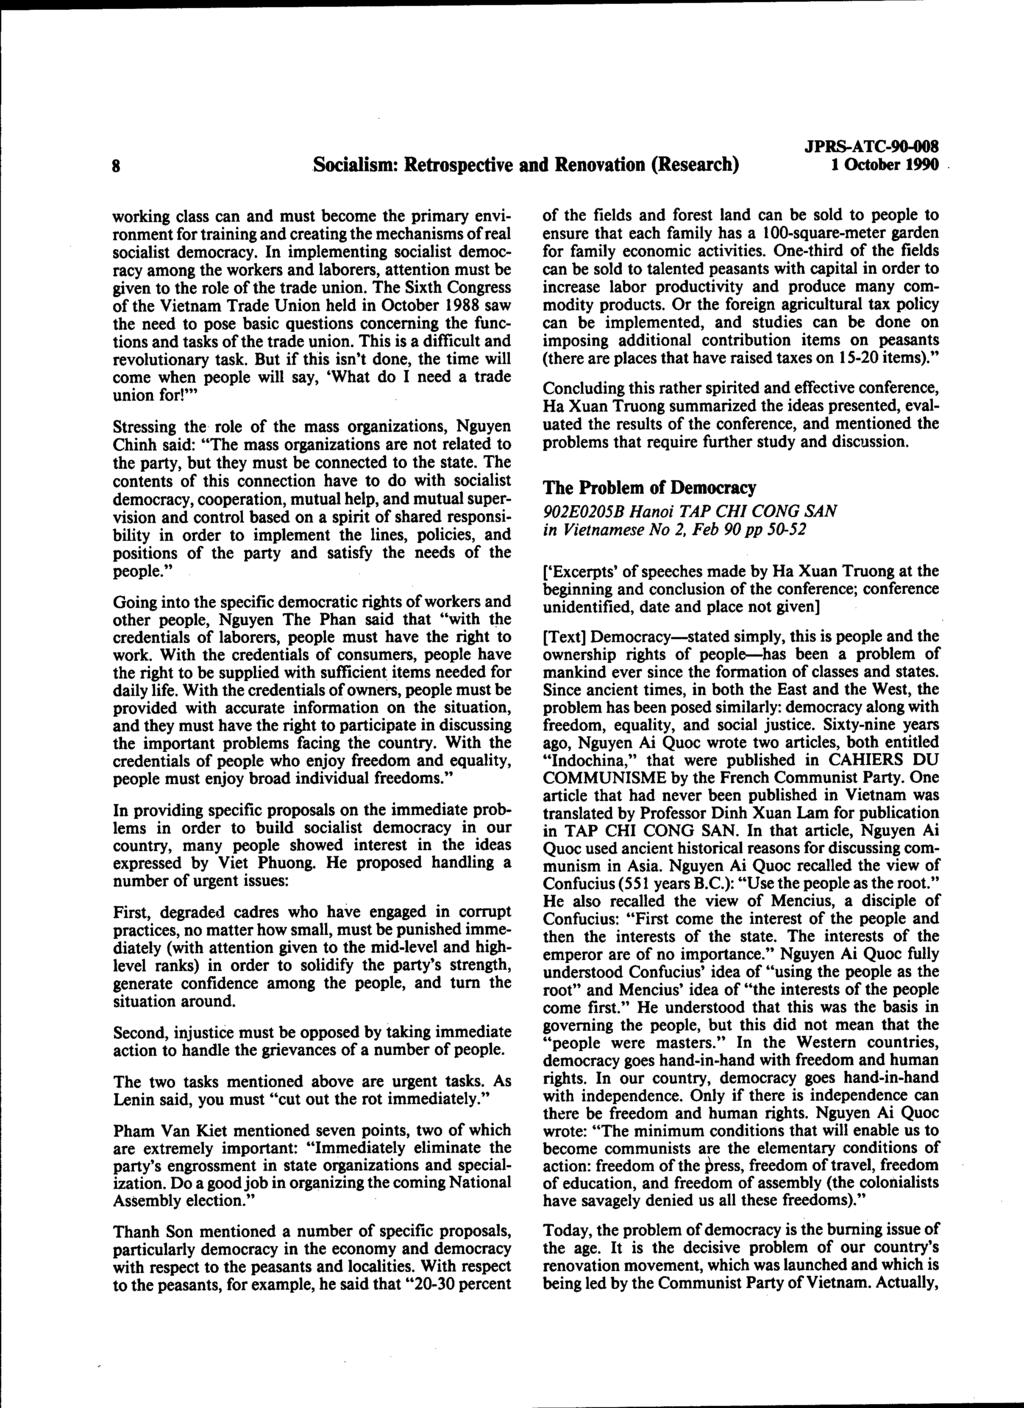 Socialism: Retrospective and Renovation (Research) 1 October 1990 working class can and must become the primary environment for training and creating the mechanisms of real socialist democracy.